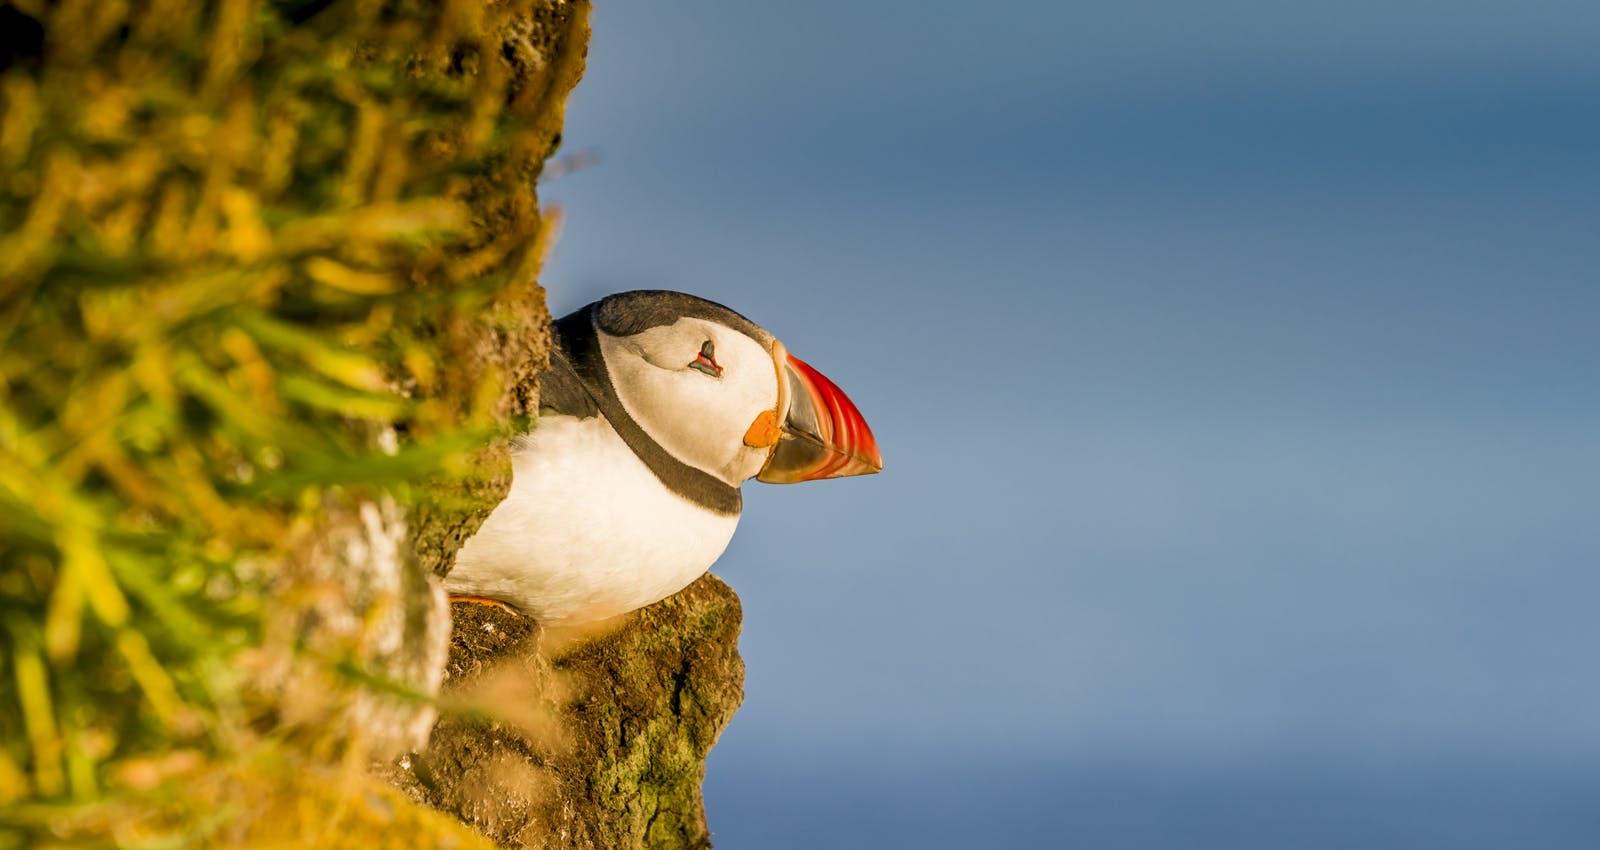 Puffin in Iceland sitting on a nest